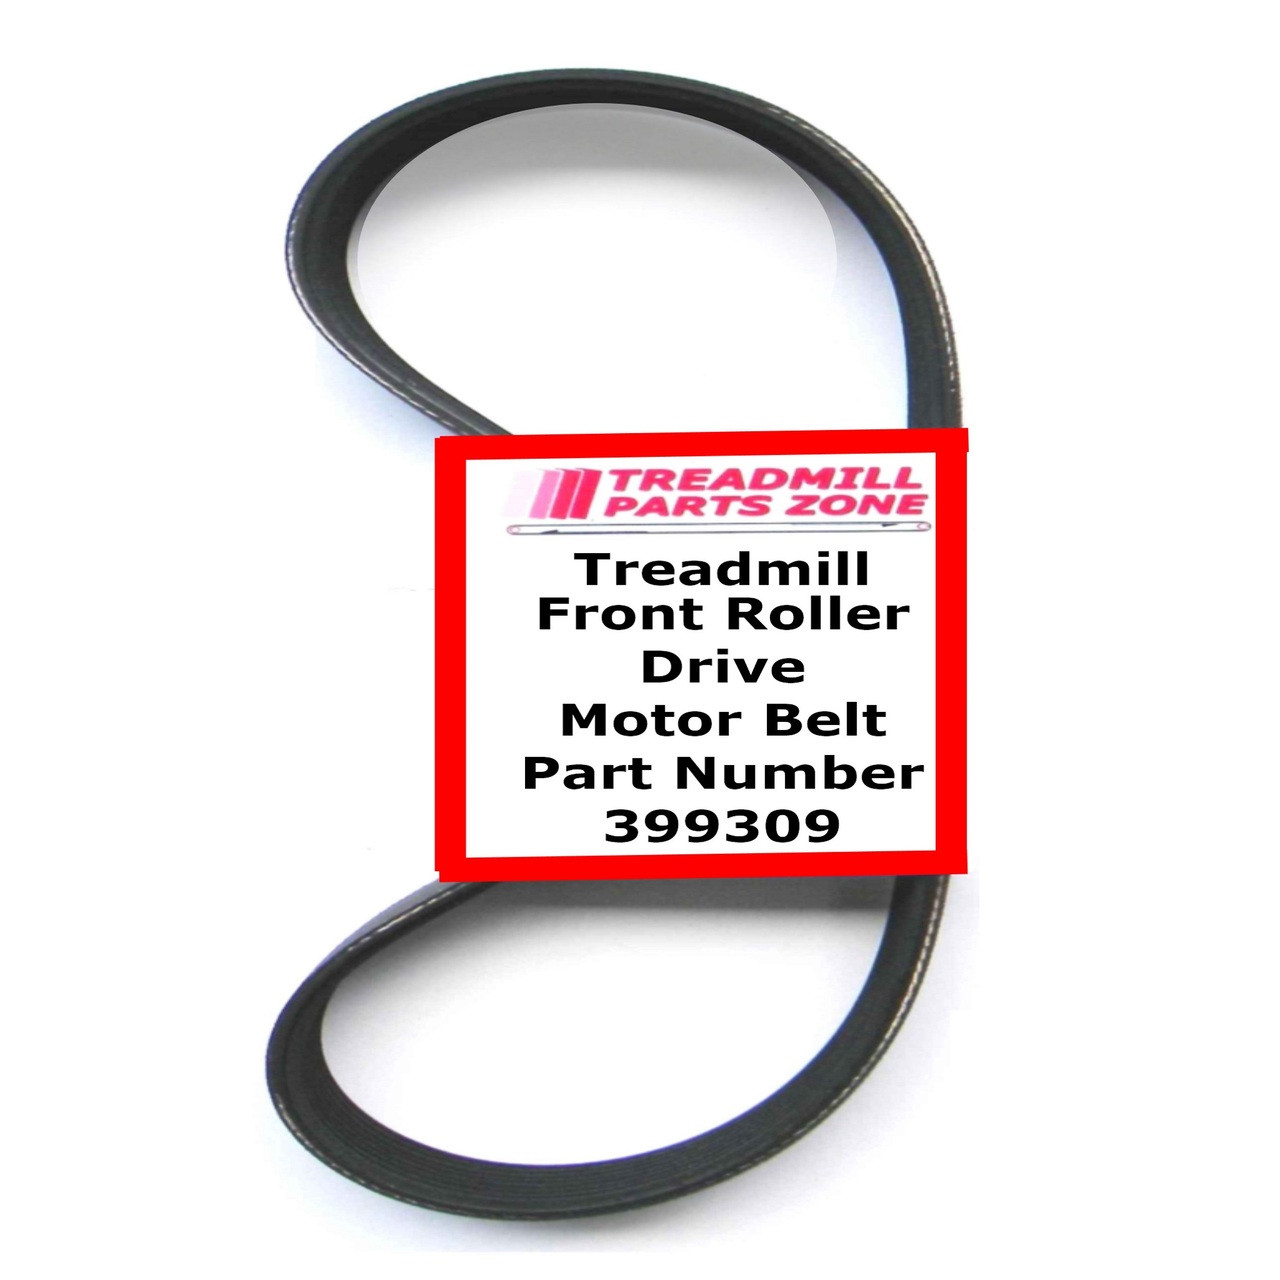 Sears Treadmill Model 24860.11 Drive Pulley Belt Part Number 399309